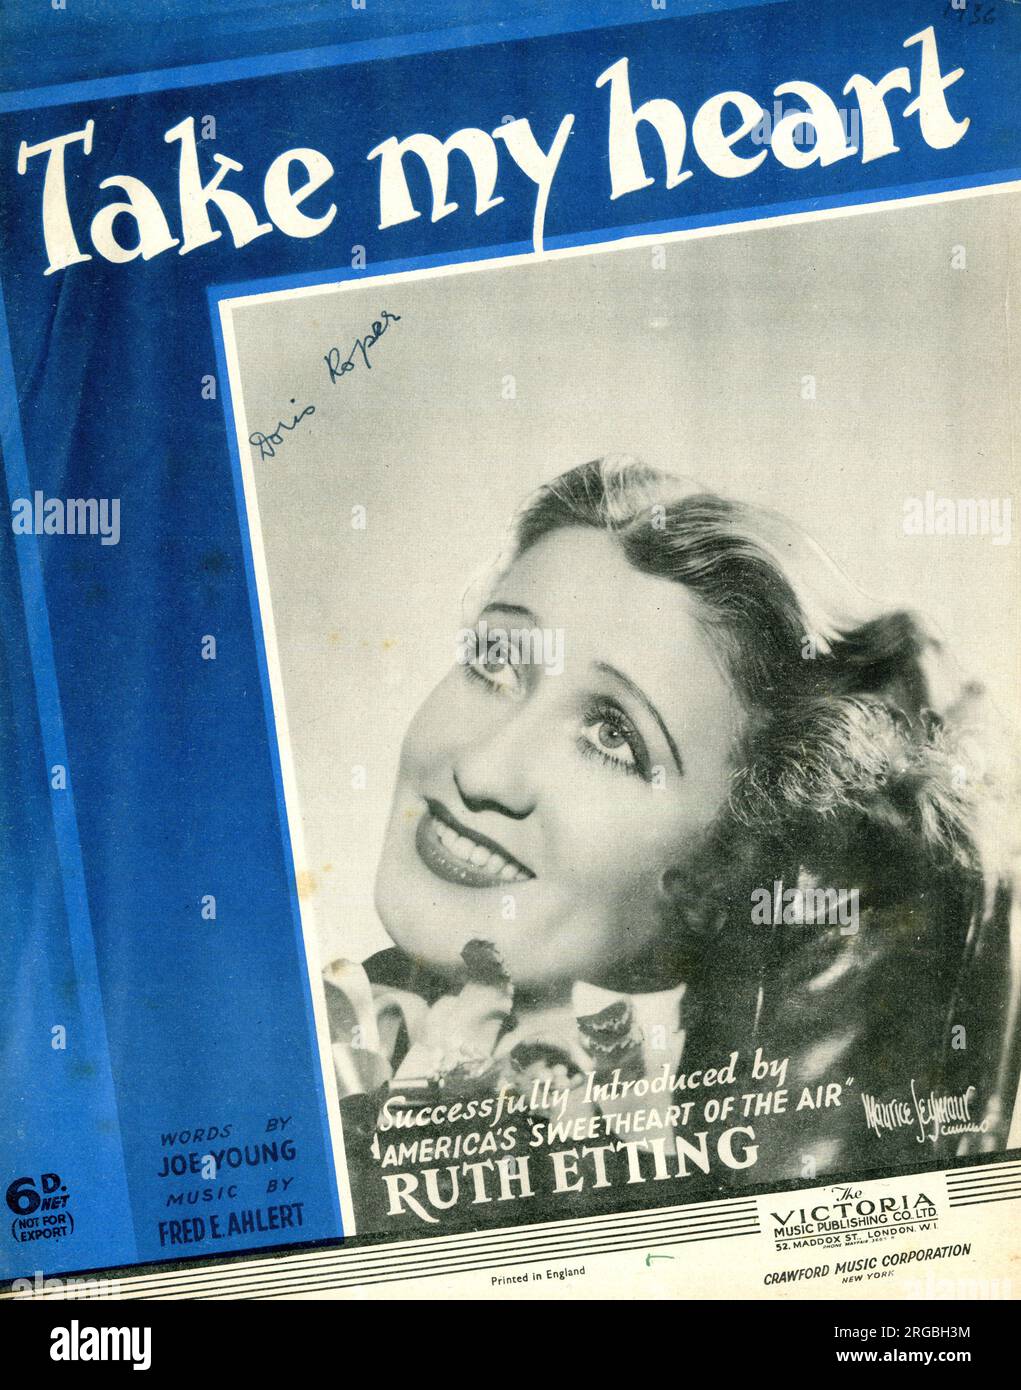 Music cover, Take My Heart, words by Joe Young, music by Fred E Ahlert, sung by Ruth Etting, America's Sweetheart of the Air. Stock Photo